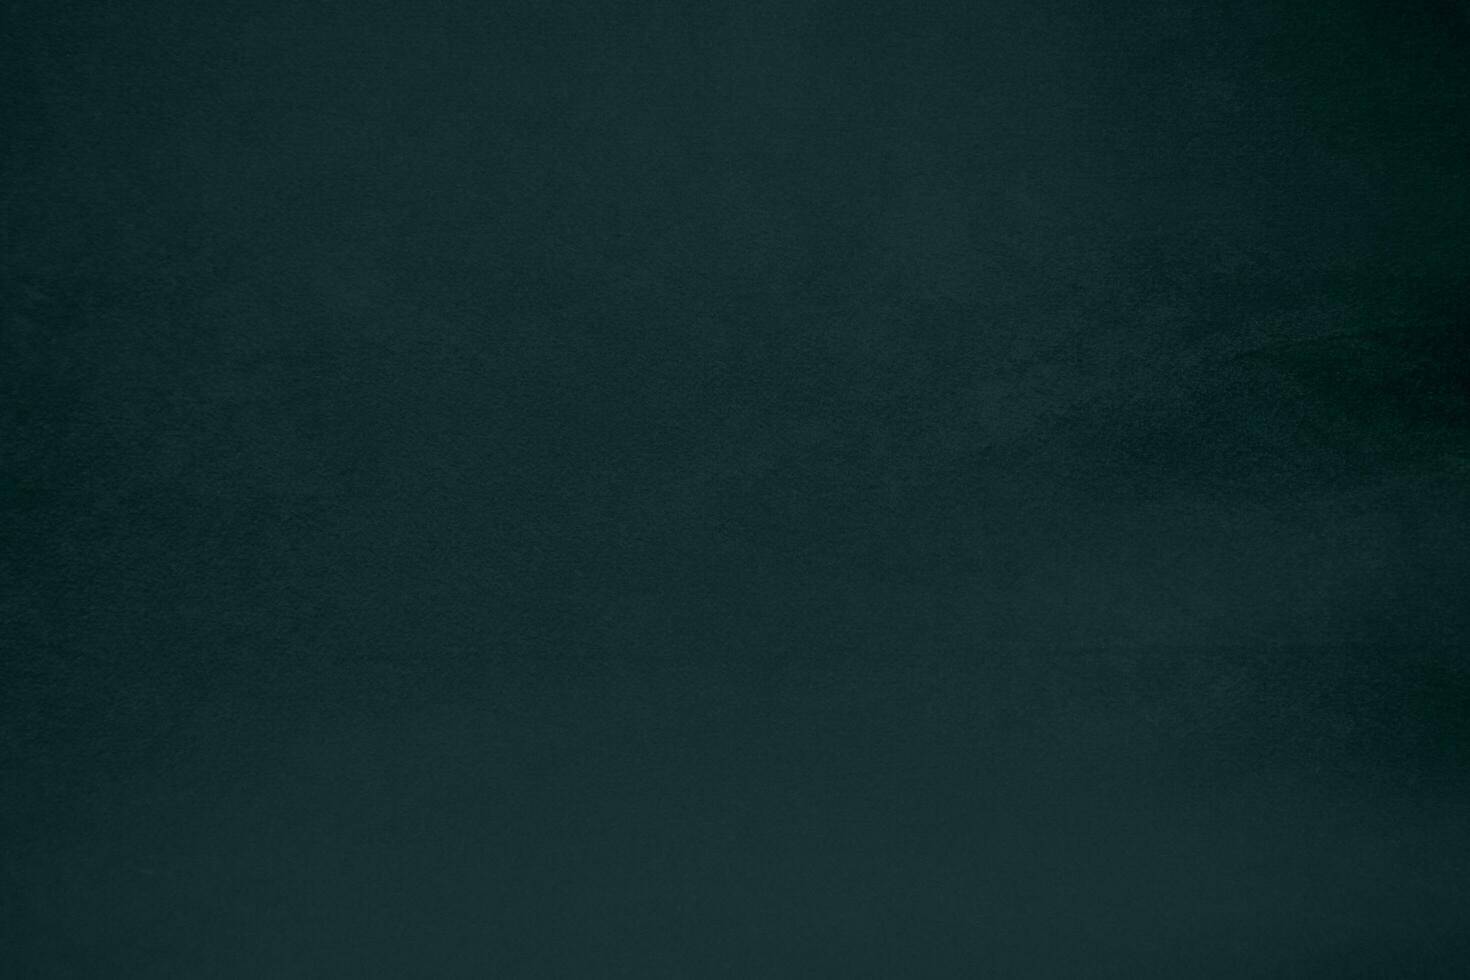 Dark green velvet fabric texture gradient used as background. Emerald color panne fabric background of soft and smooth textile material. crushed velvet .luxury emerald tone for silk. photo